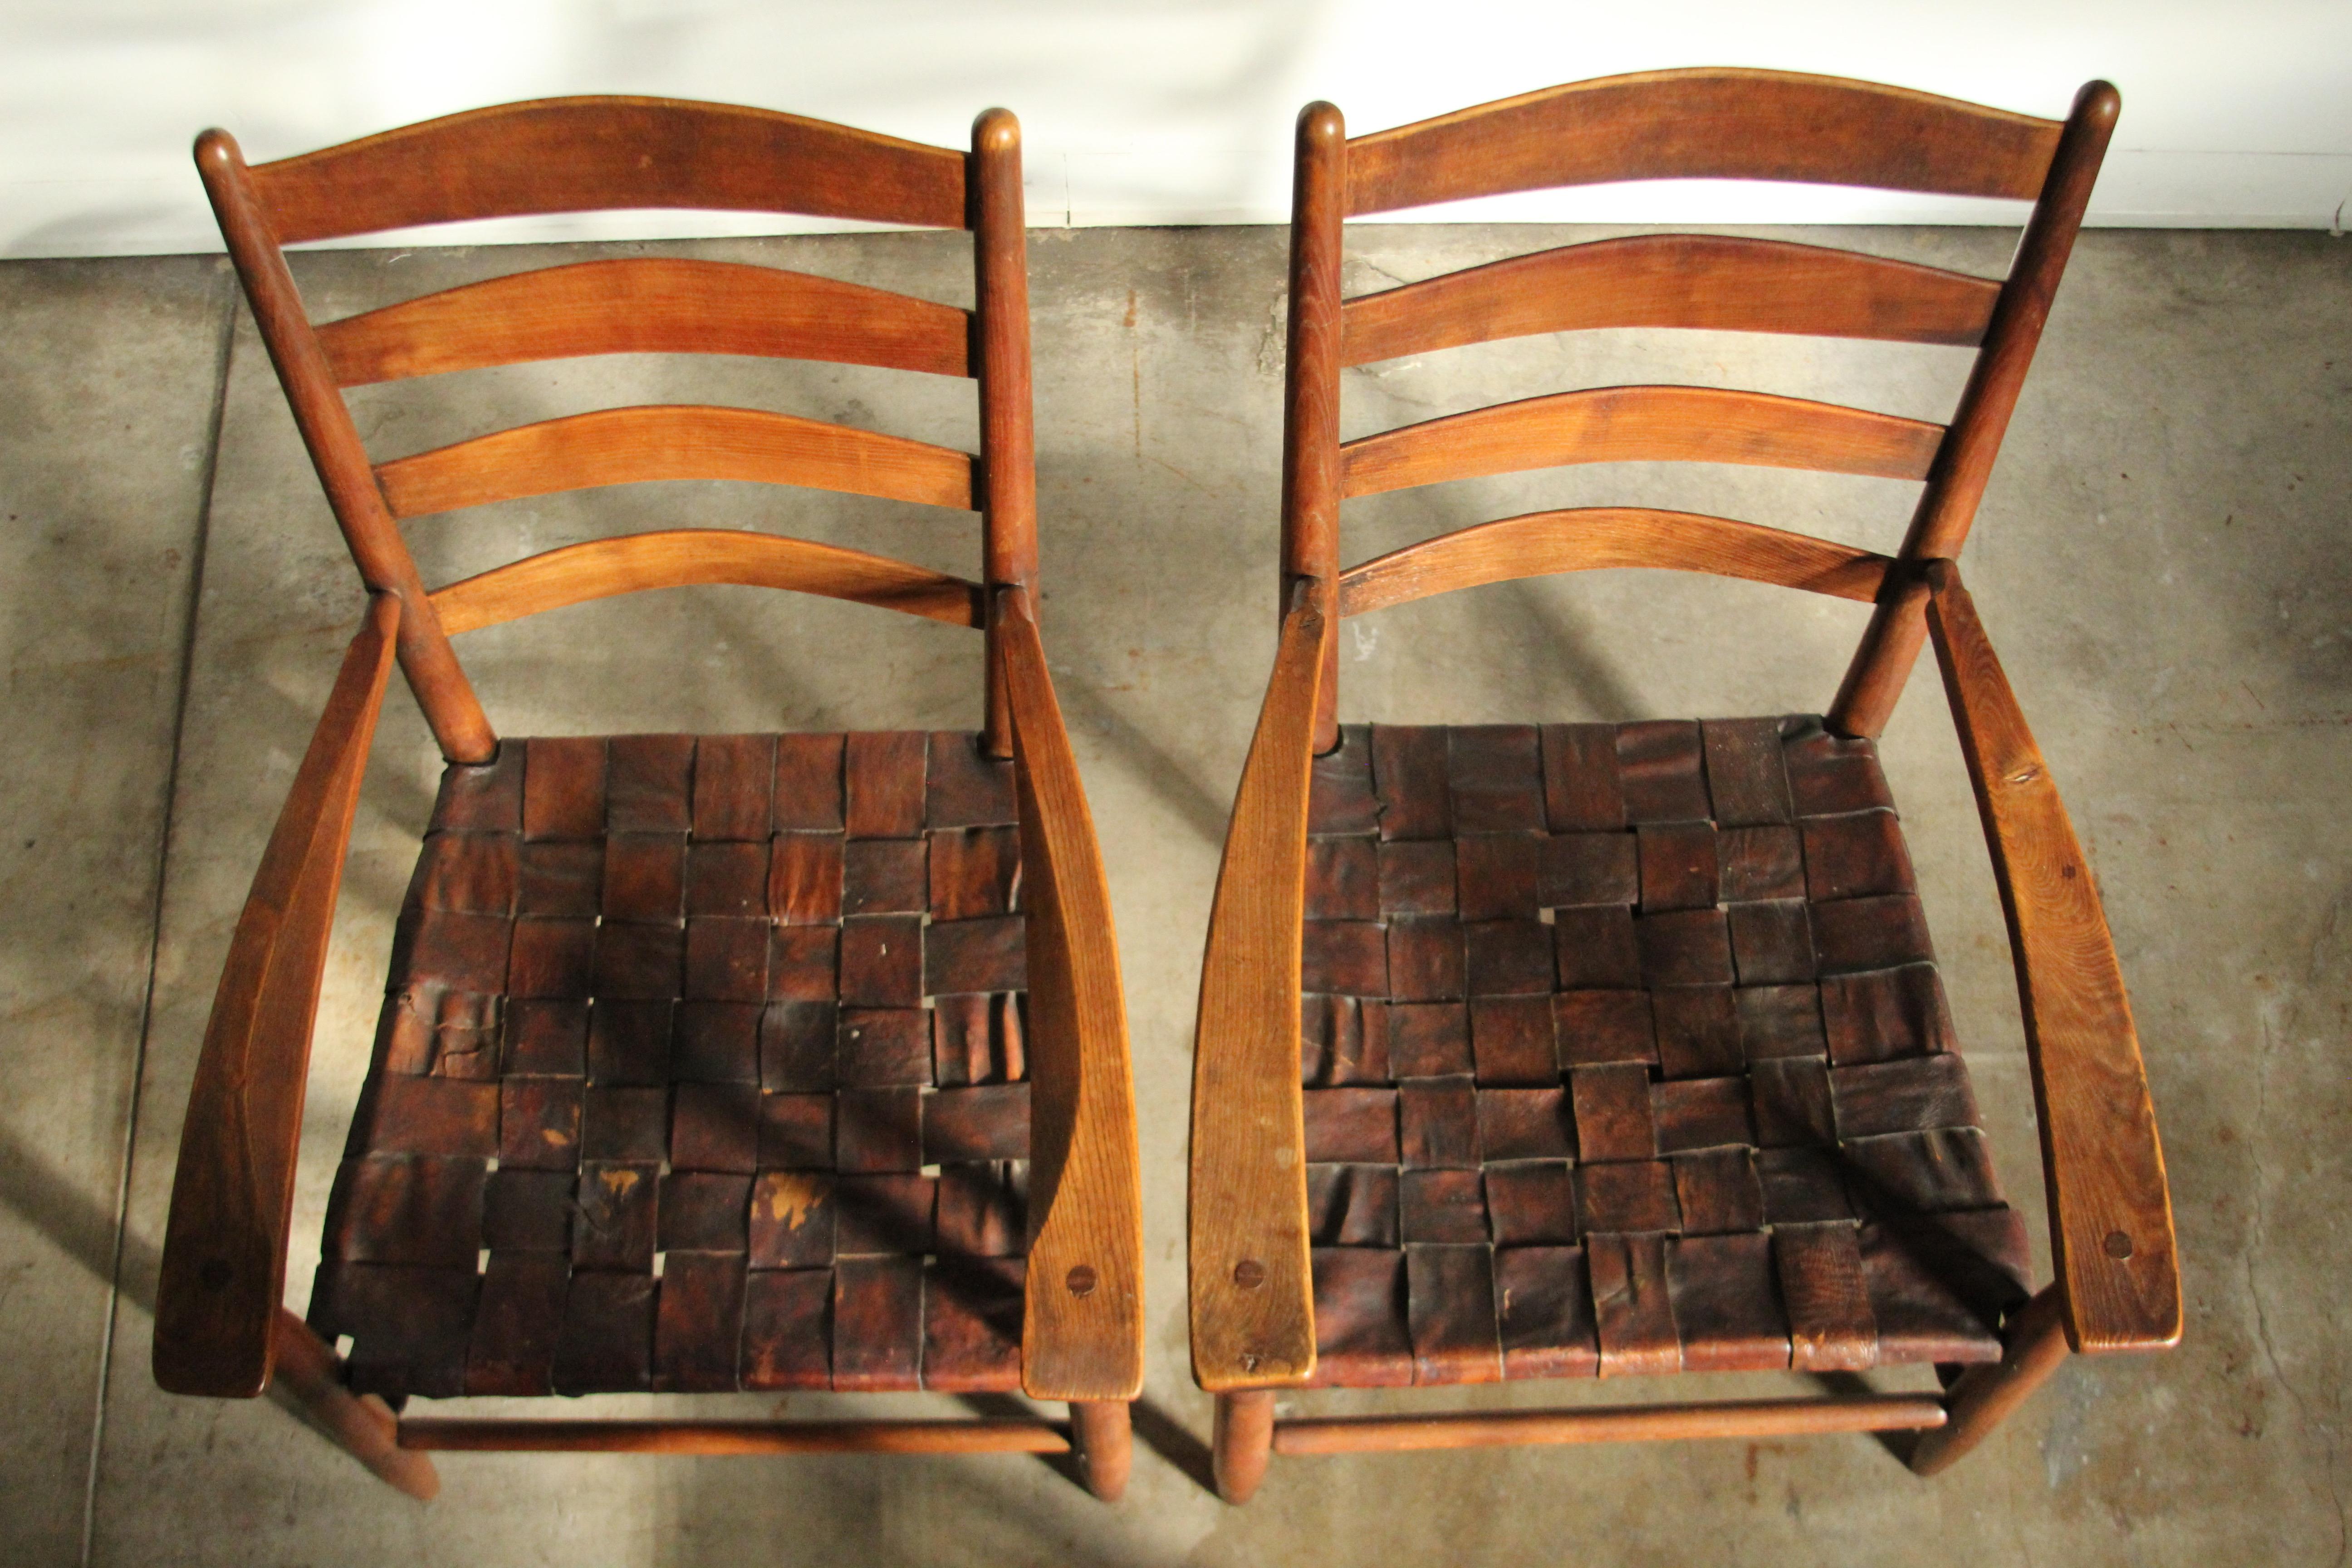 Gordon Russell Hand Built Ladder Back Oak & Woven Leather Lounge Chairs, 1904 For Sale 11